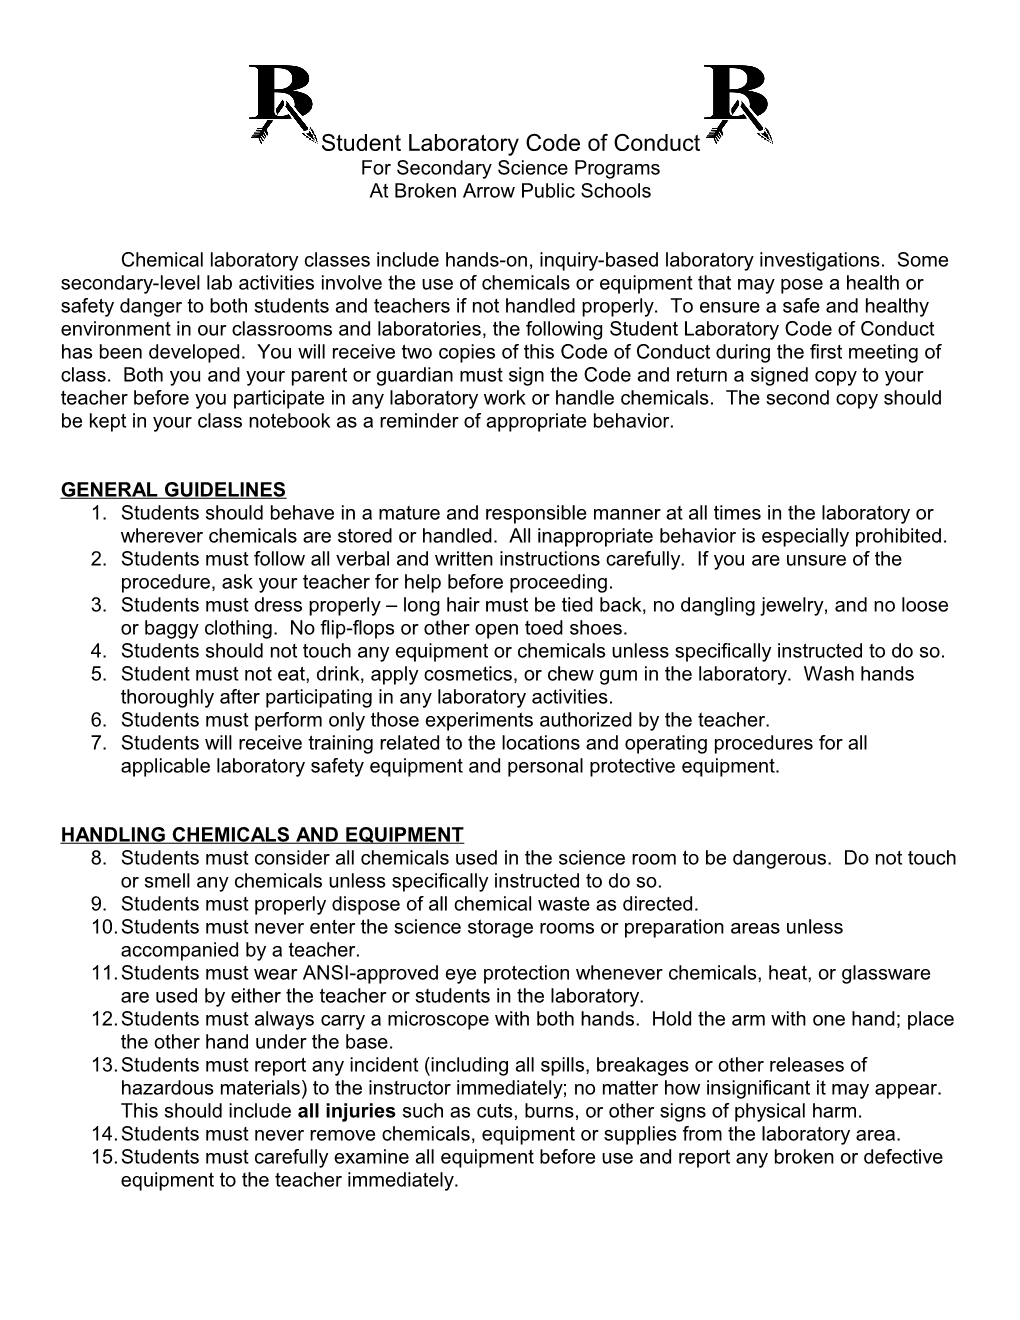 Student Laboratory Code of Conduct s1